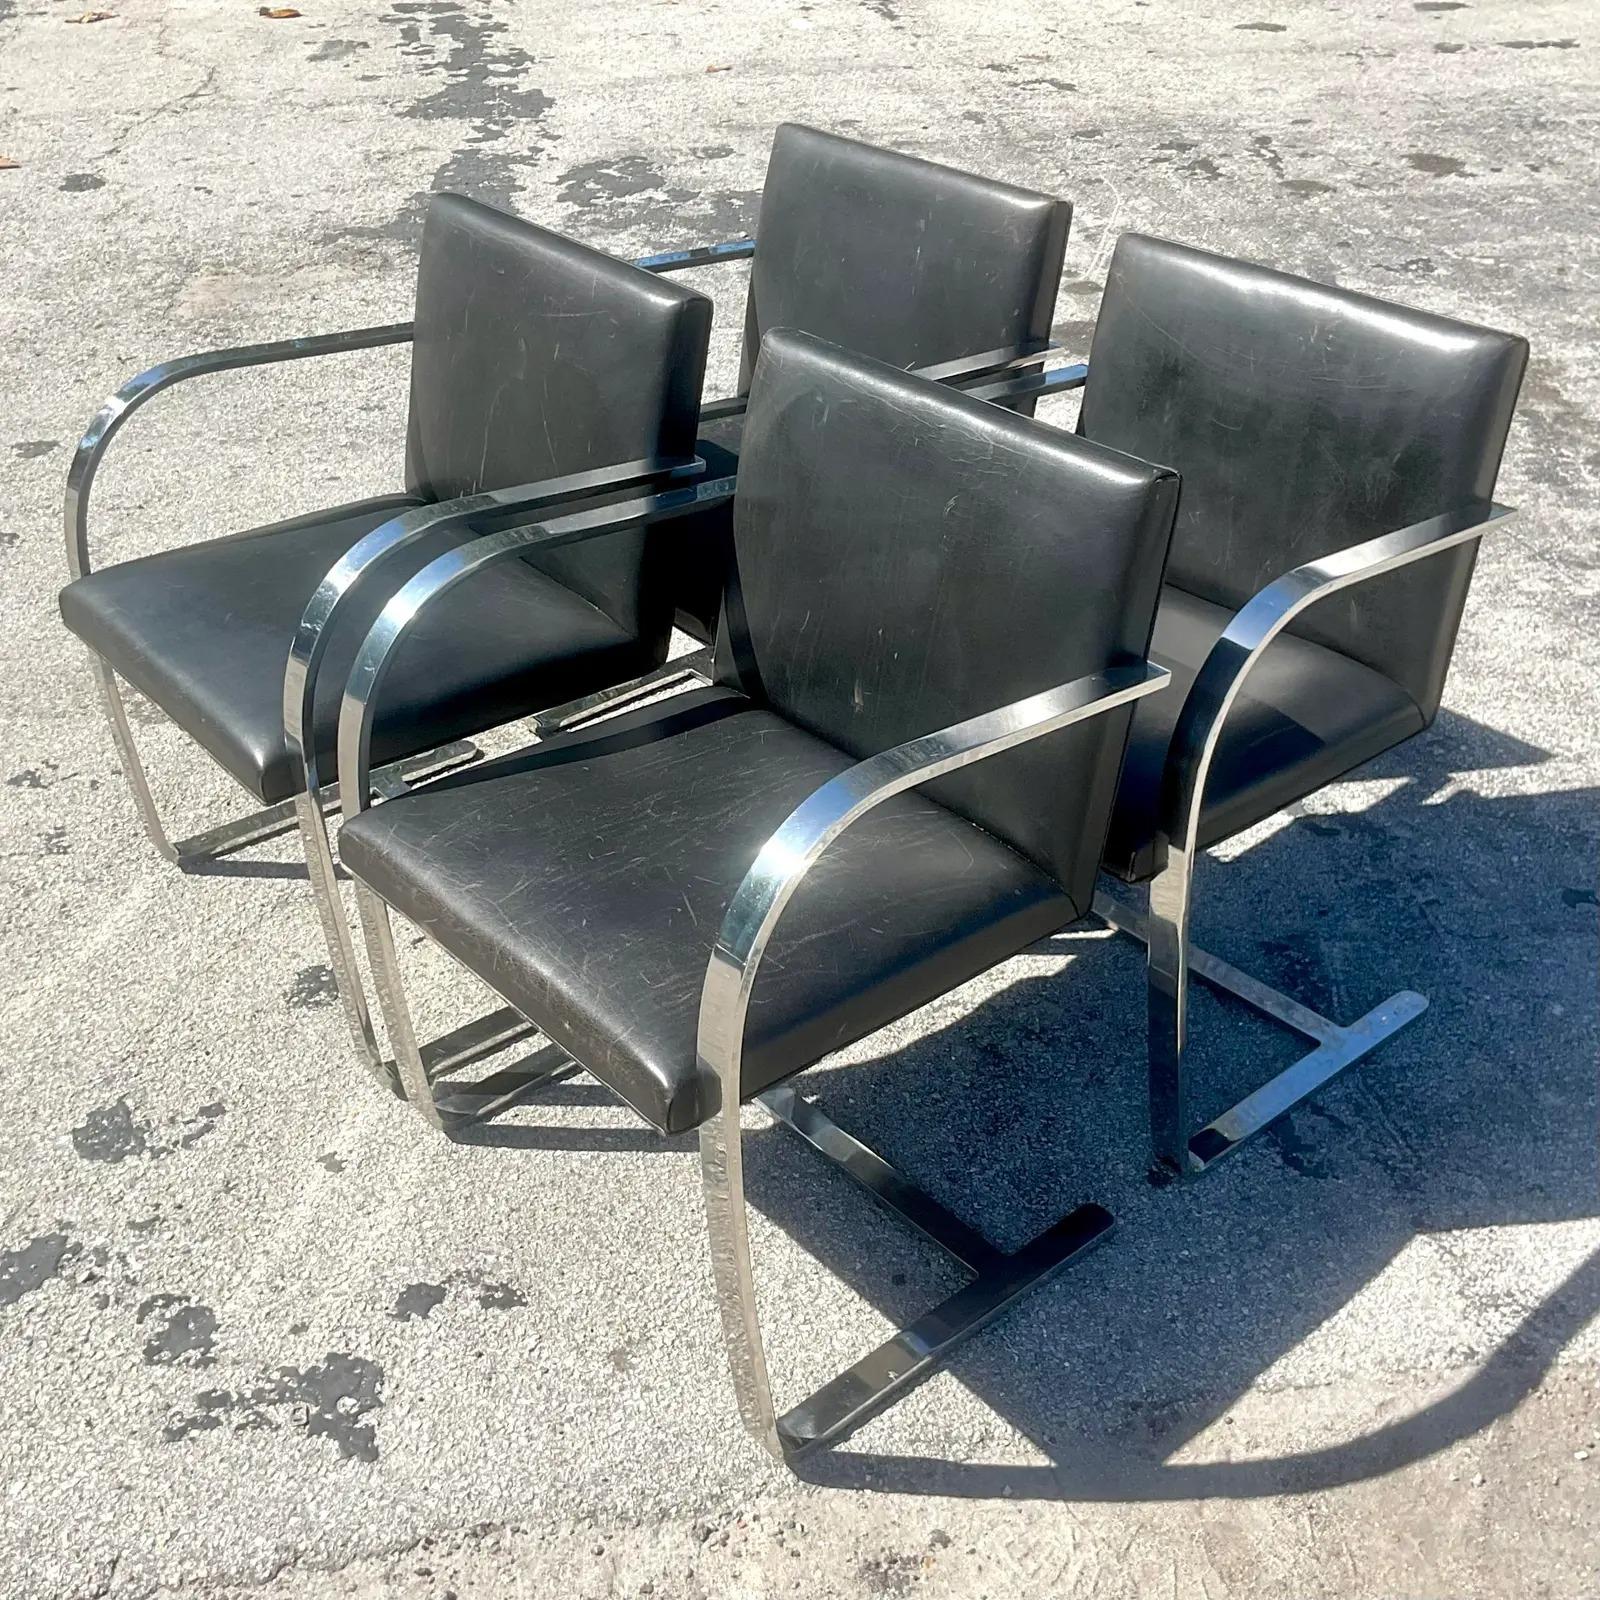 Vintage MCM Miles Van Der Rohe for Knoll Brno Chairs - Set of 4 For Sale 2